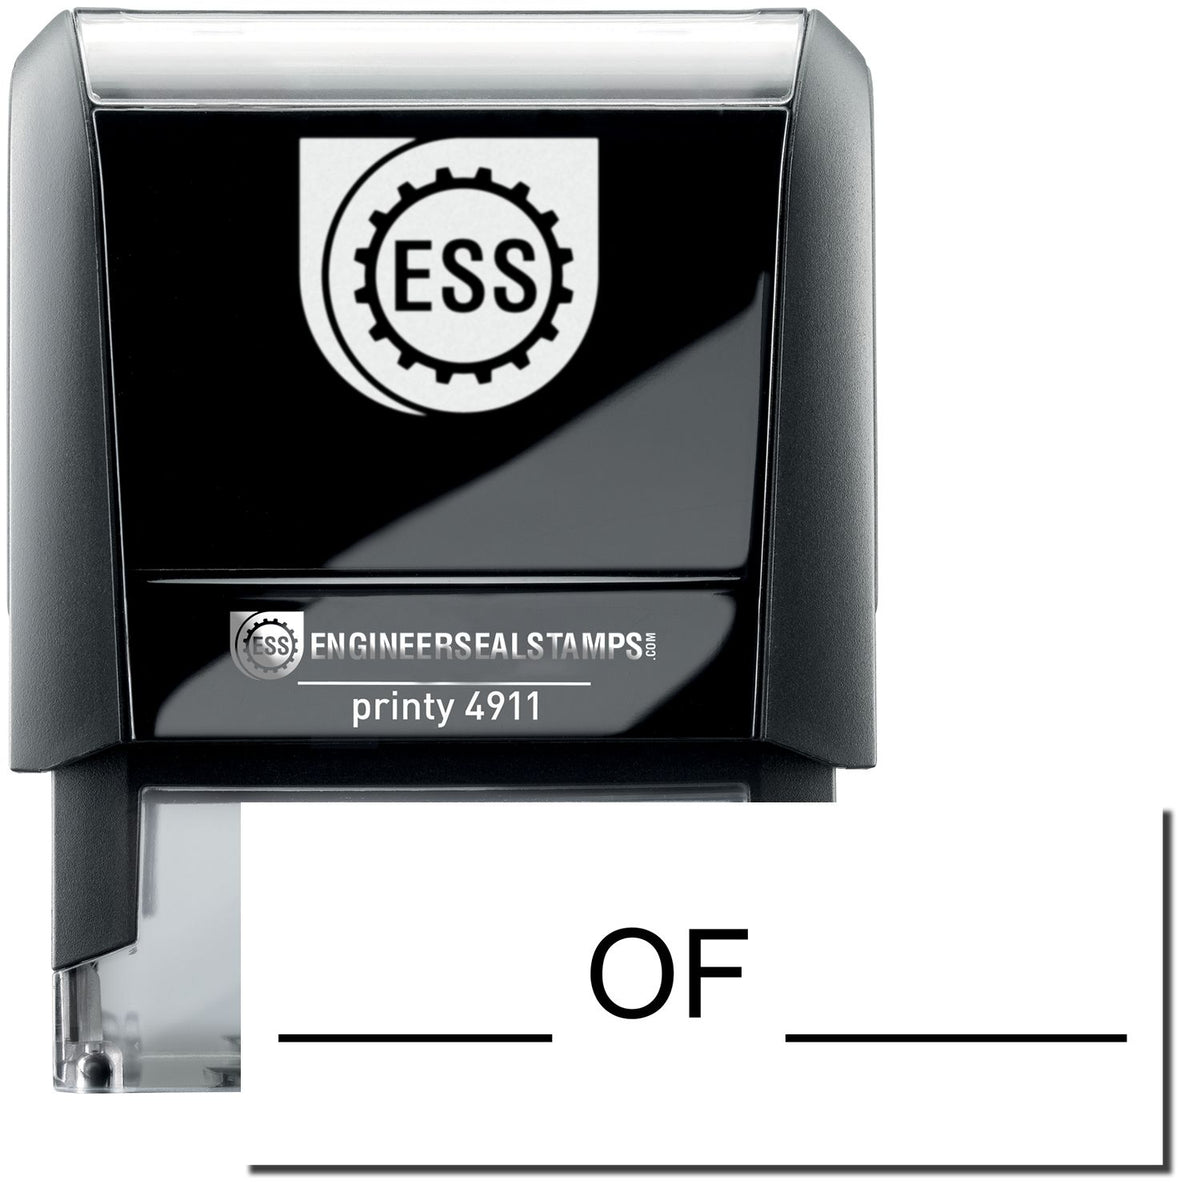 A self-inking stamp with a stamped image showing how the text &quot;____ OF ____&quot; is displayed after stamping.